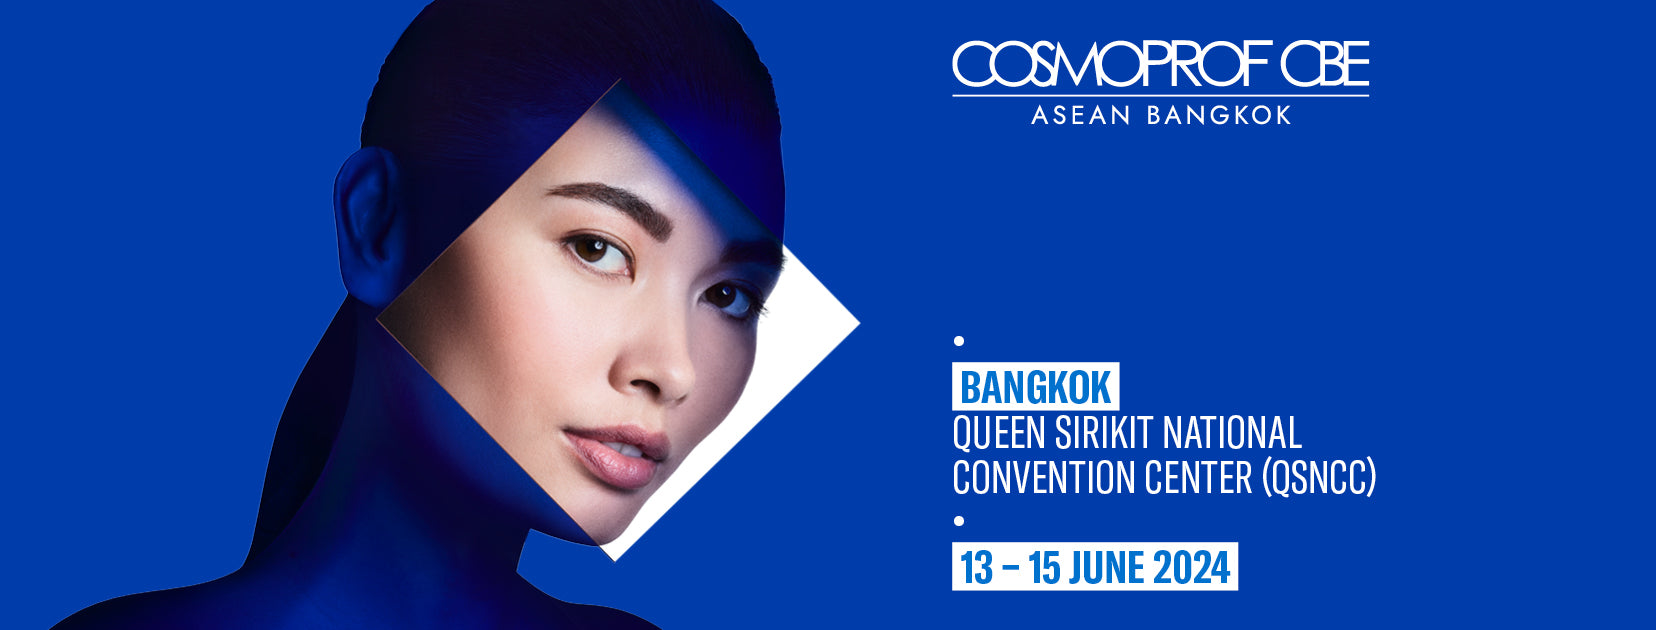 Are you ready to dive into the world of beauty and cosmetics at Cosmoprof CBE ASEAN in Thailand this June 2024?